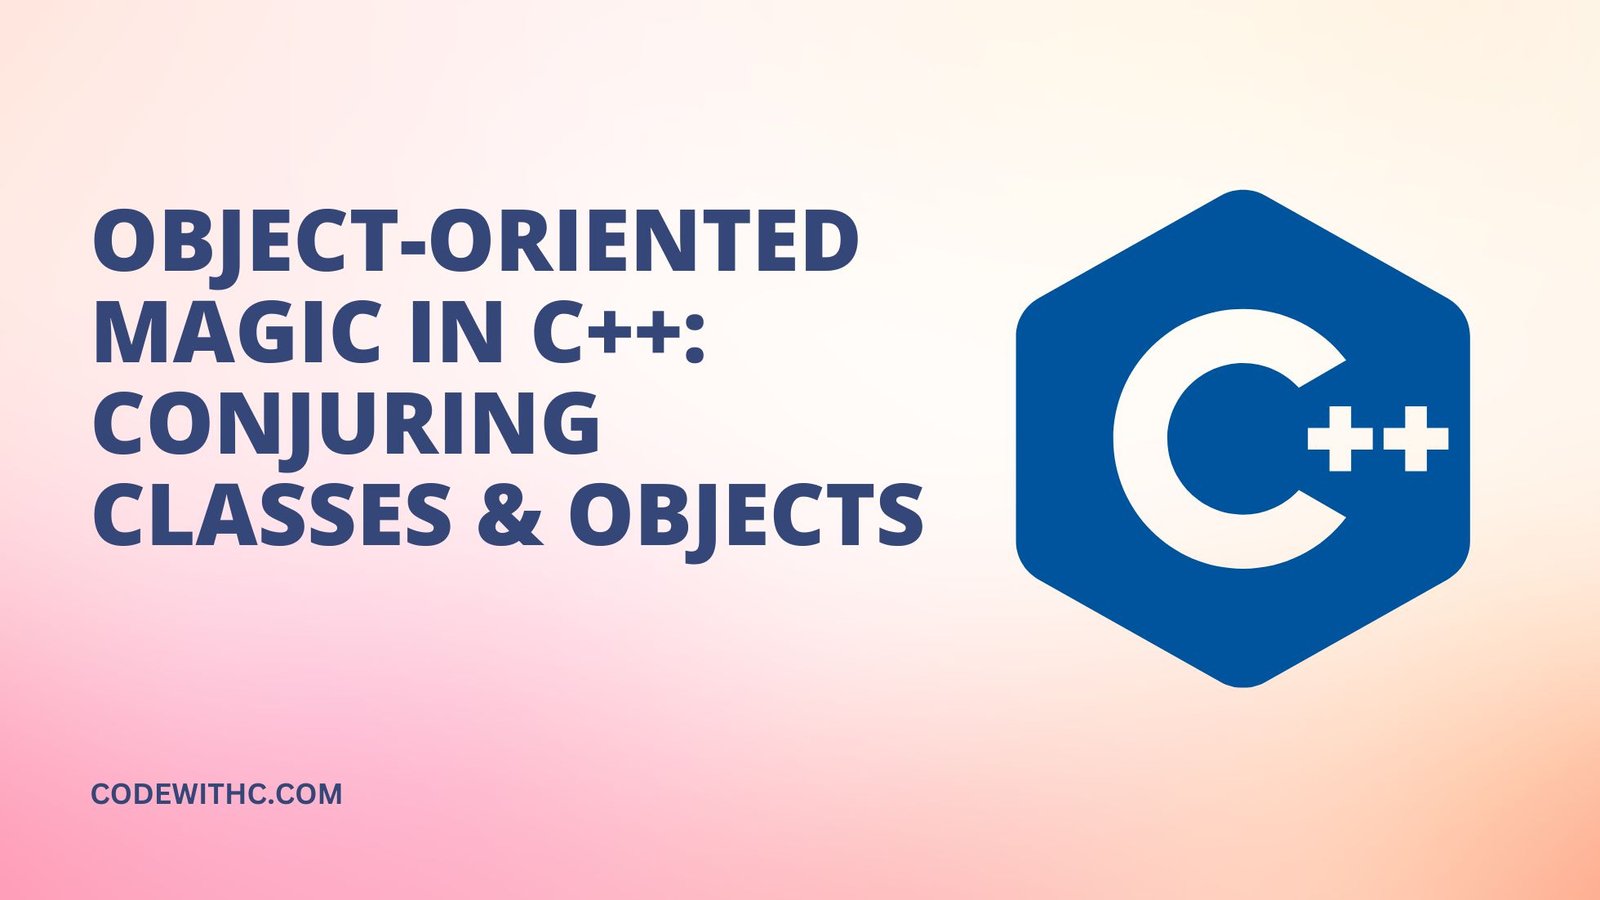 Object-Oriented Magic in C++: Conjuring Classes & Objects